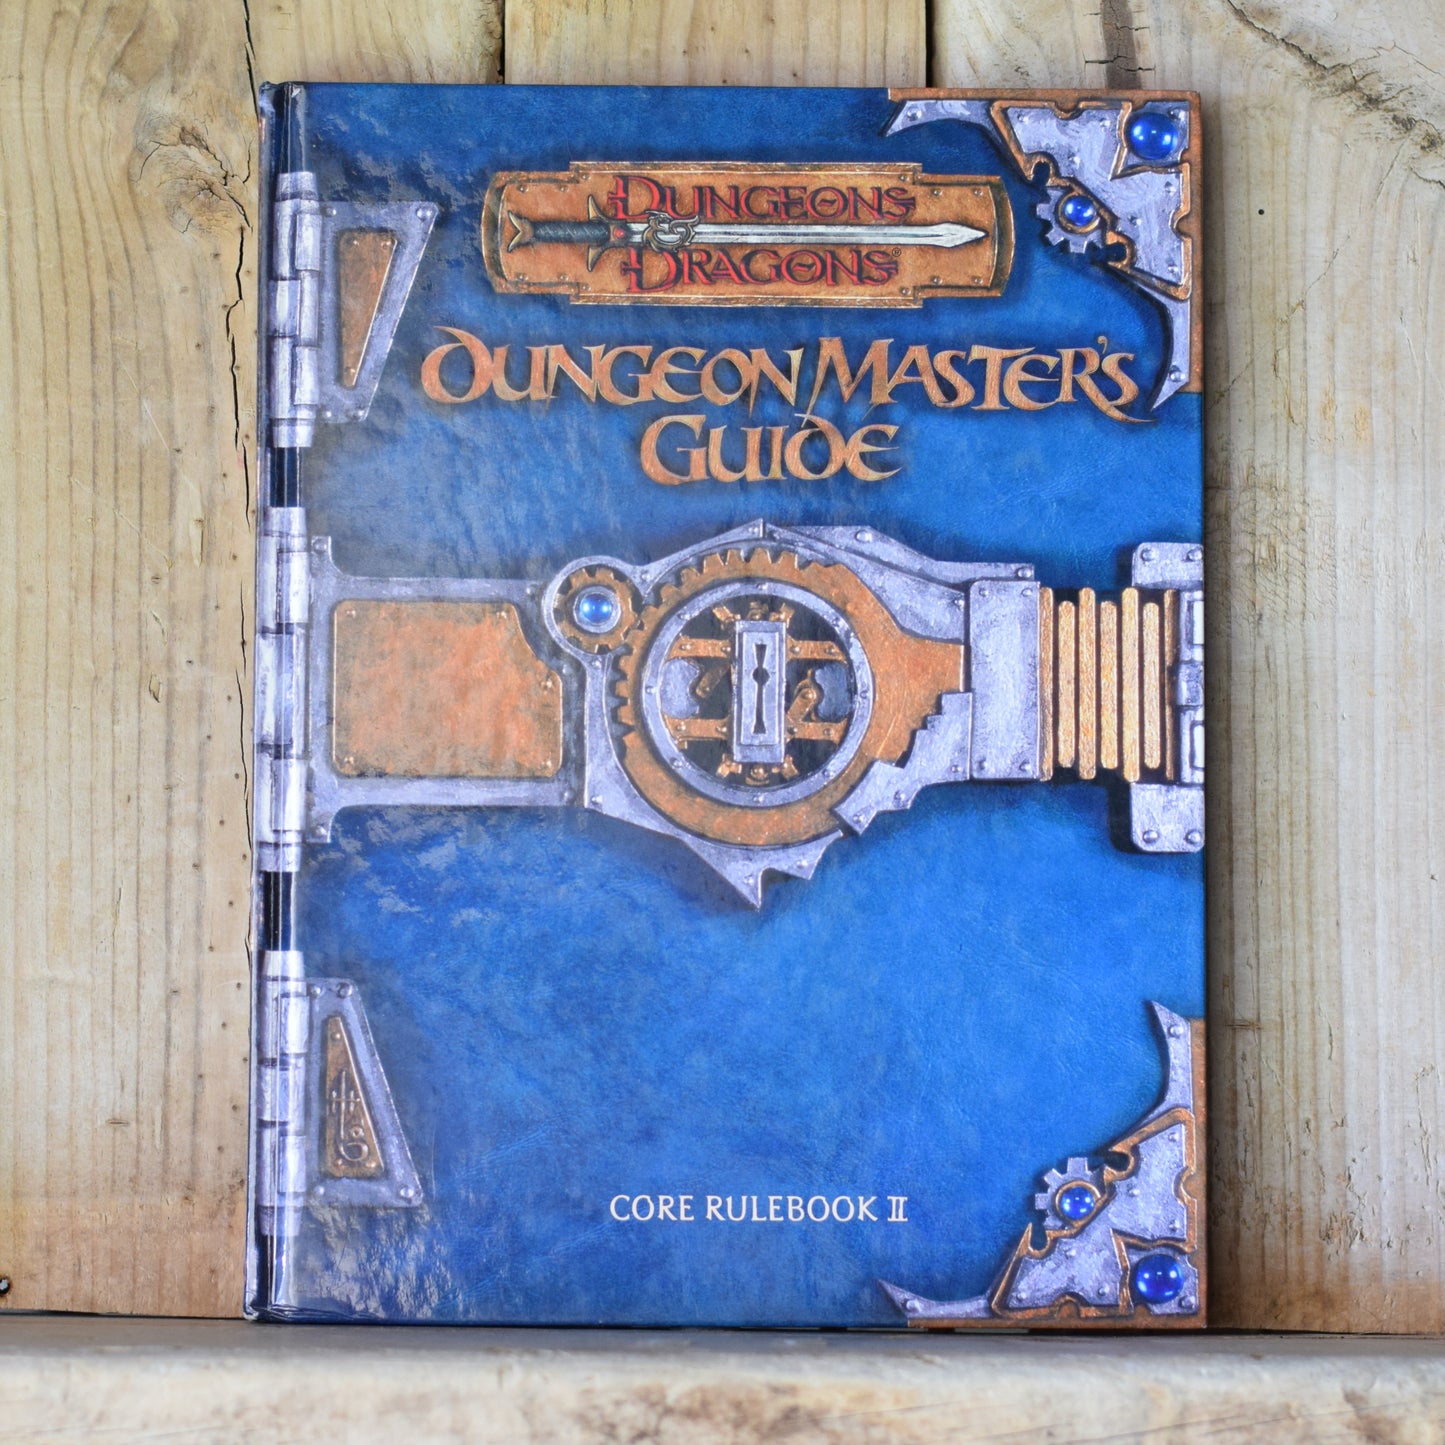 Vintage RPG Hardback: Dungeons and Dragons 3e: Dungeon Master's Guide - FIRST PRINTING